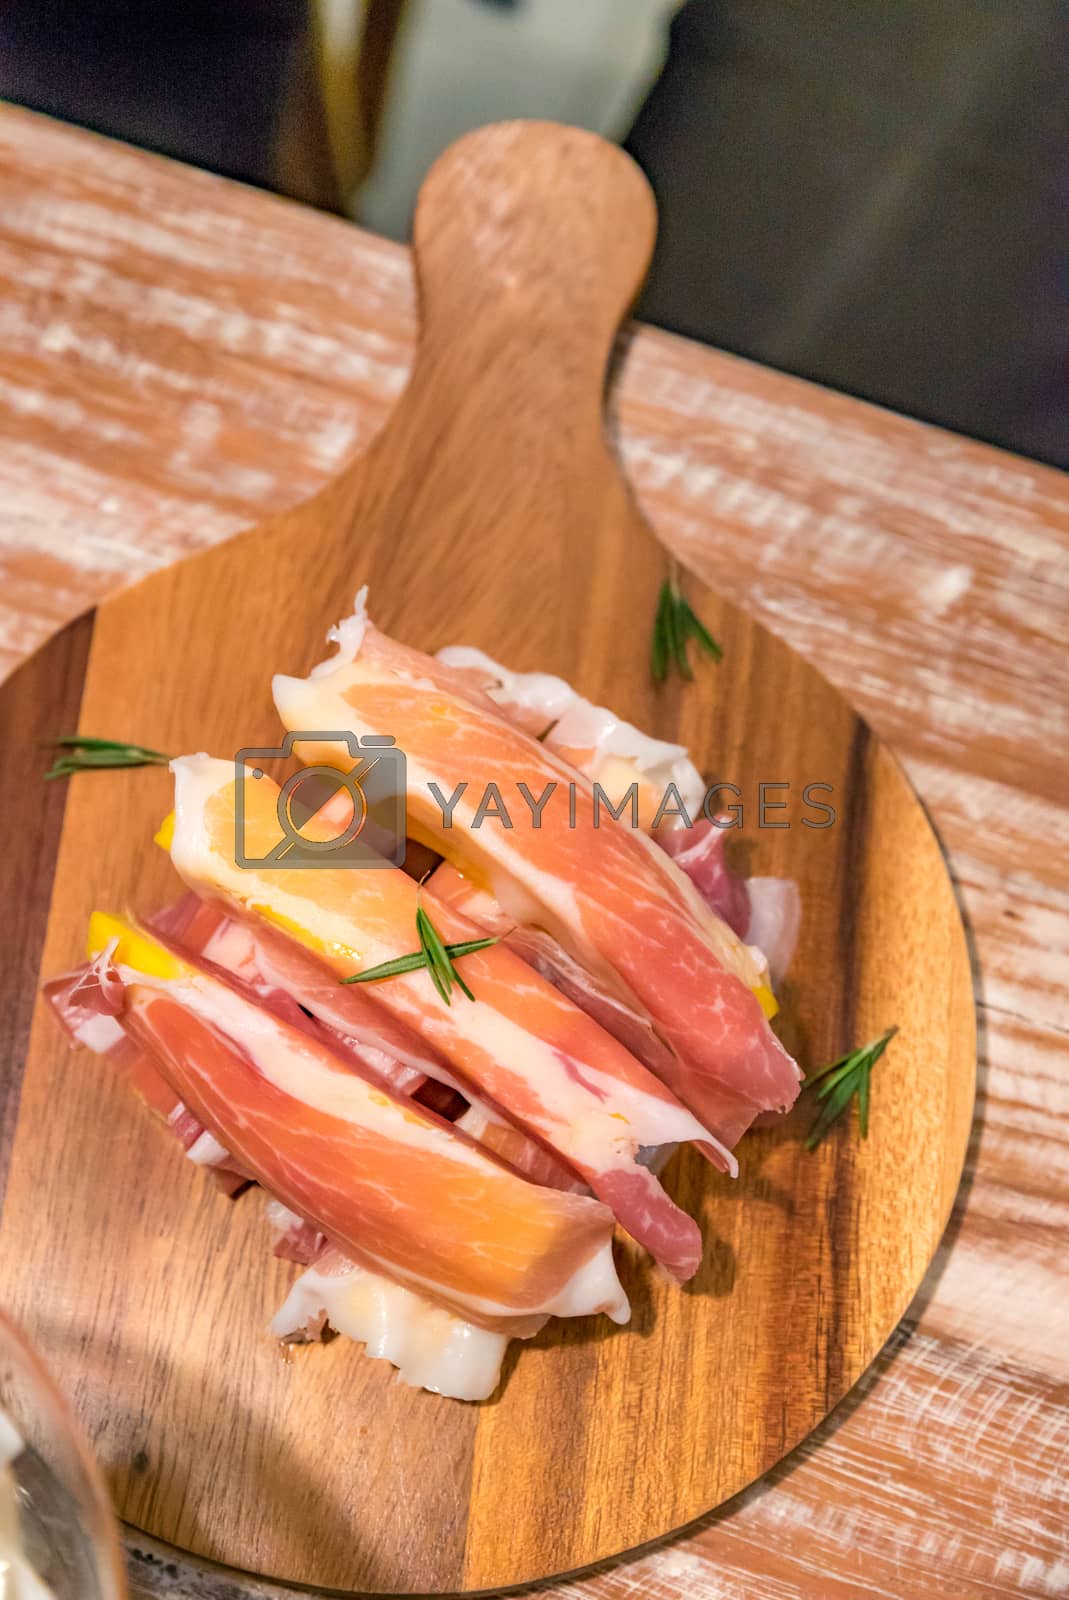 Royalty free image of antipasto cold cut by vichie81